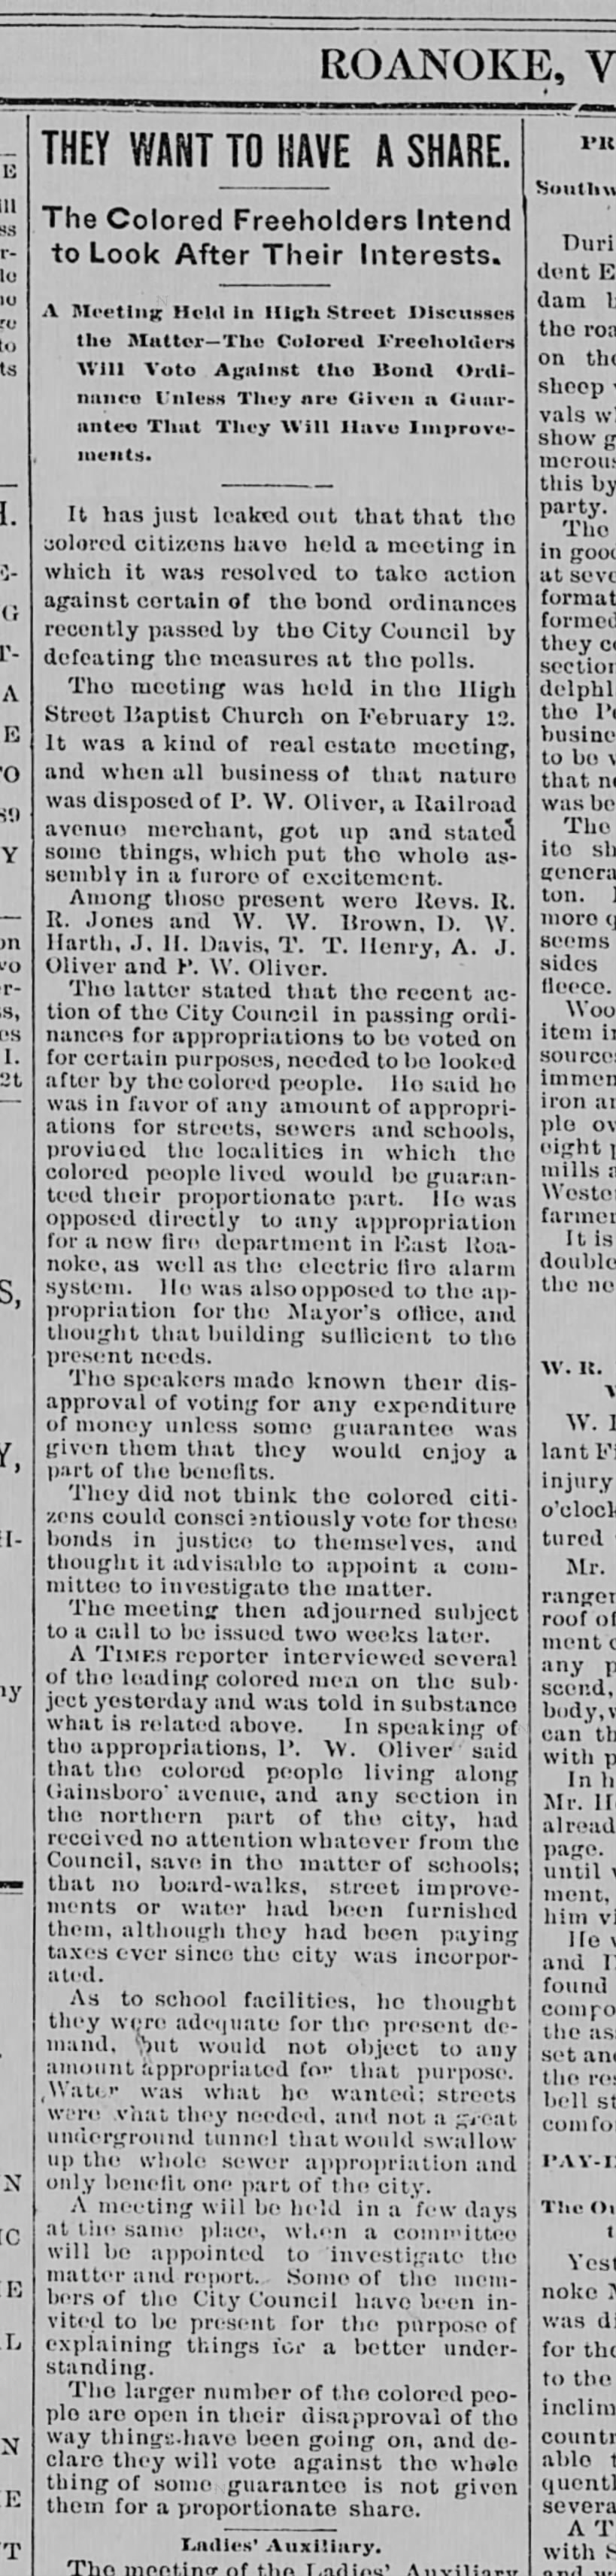 Patrick Edwards - quoted will Vote against Bond Ordinance unless...1891